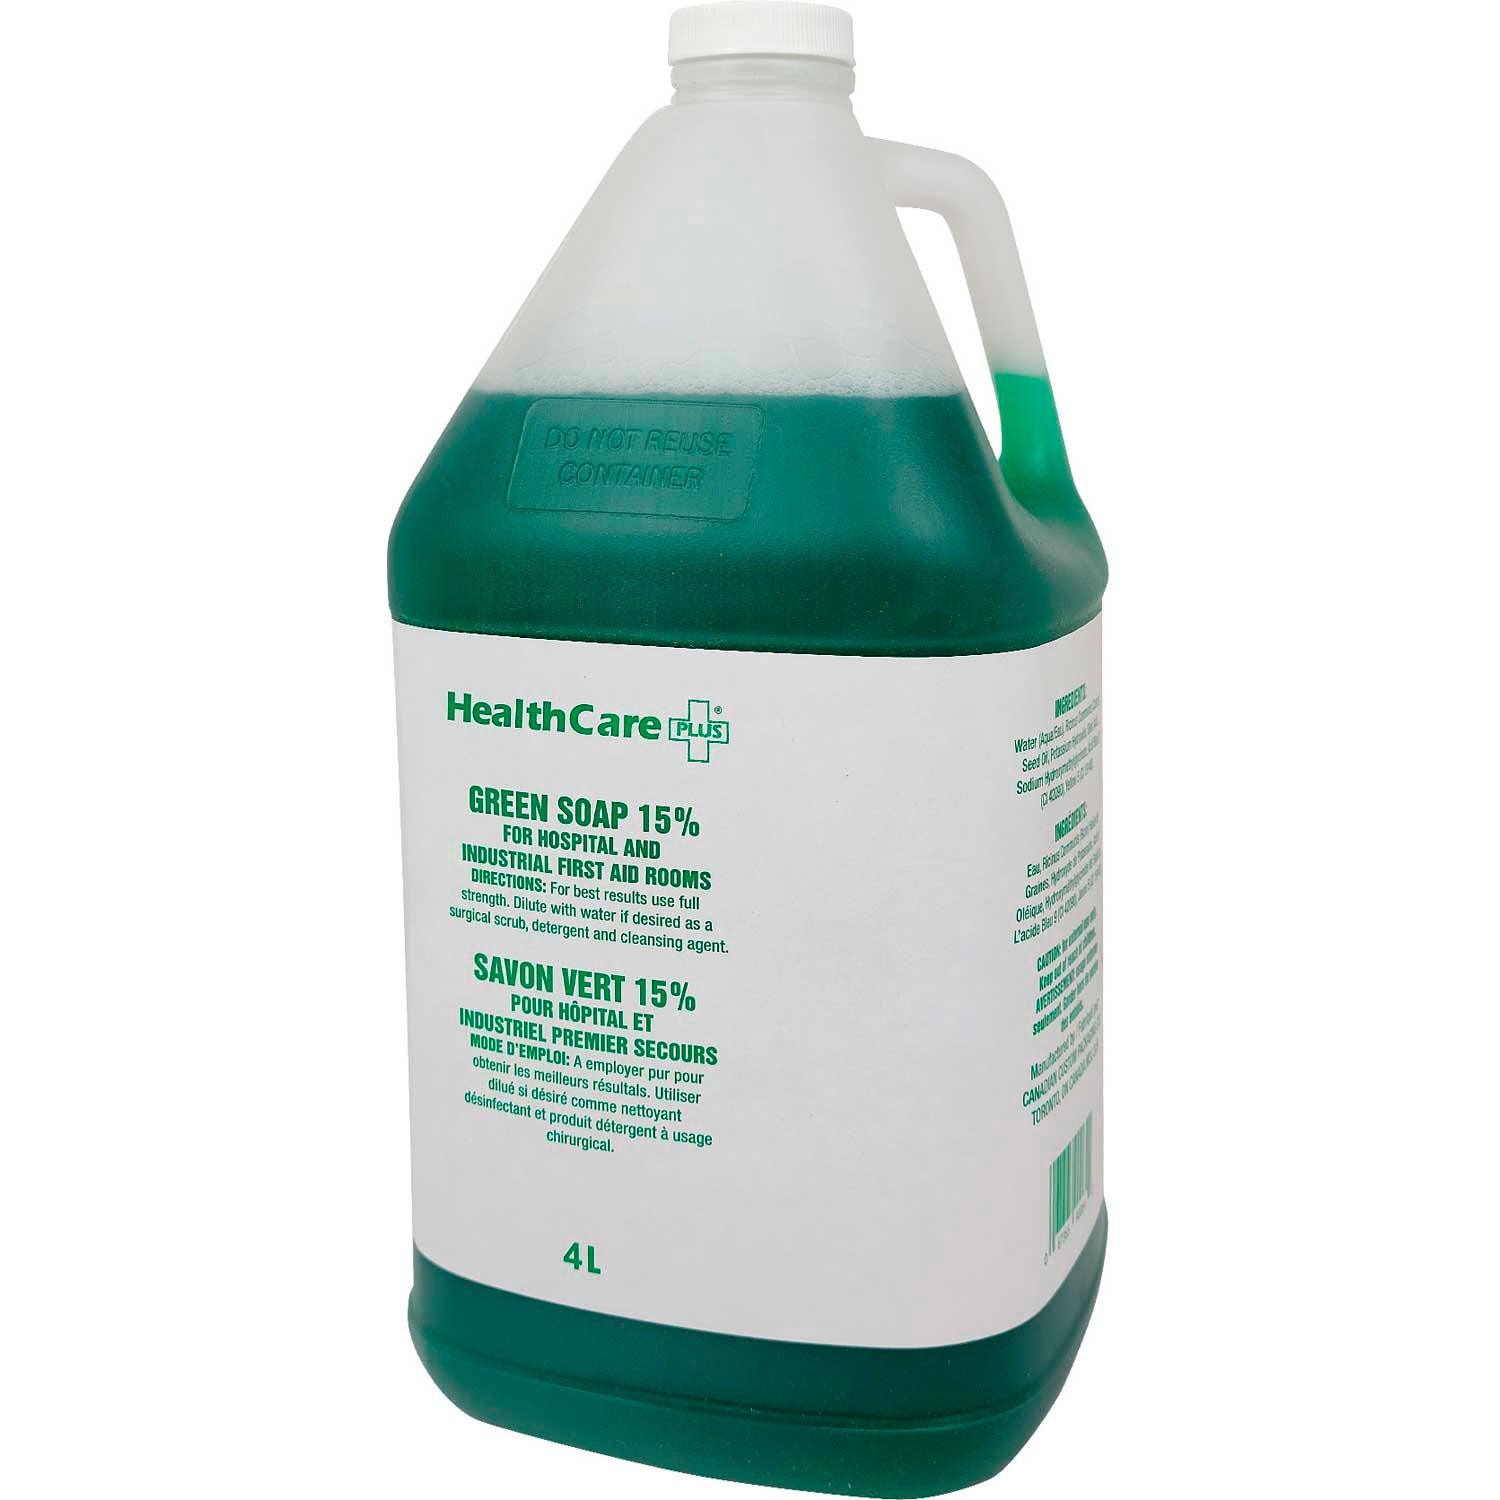 Green Soap 15 % for Hospital & Industrial First Aid Rooms - 4L